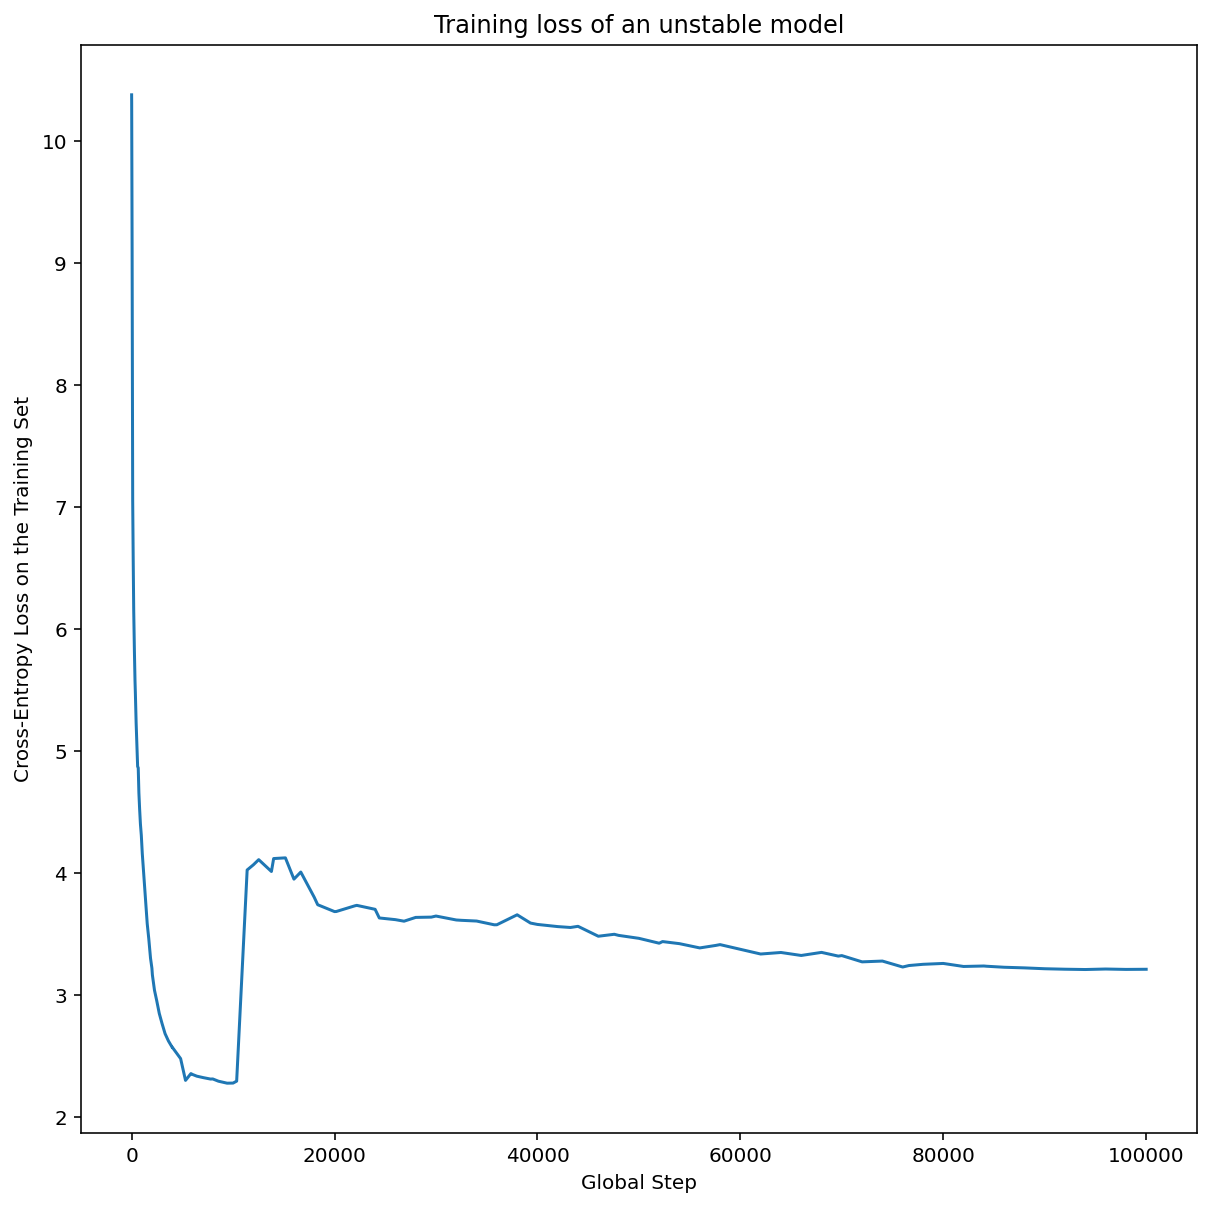 Loss curve for model with instability